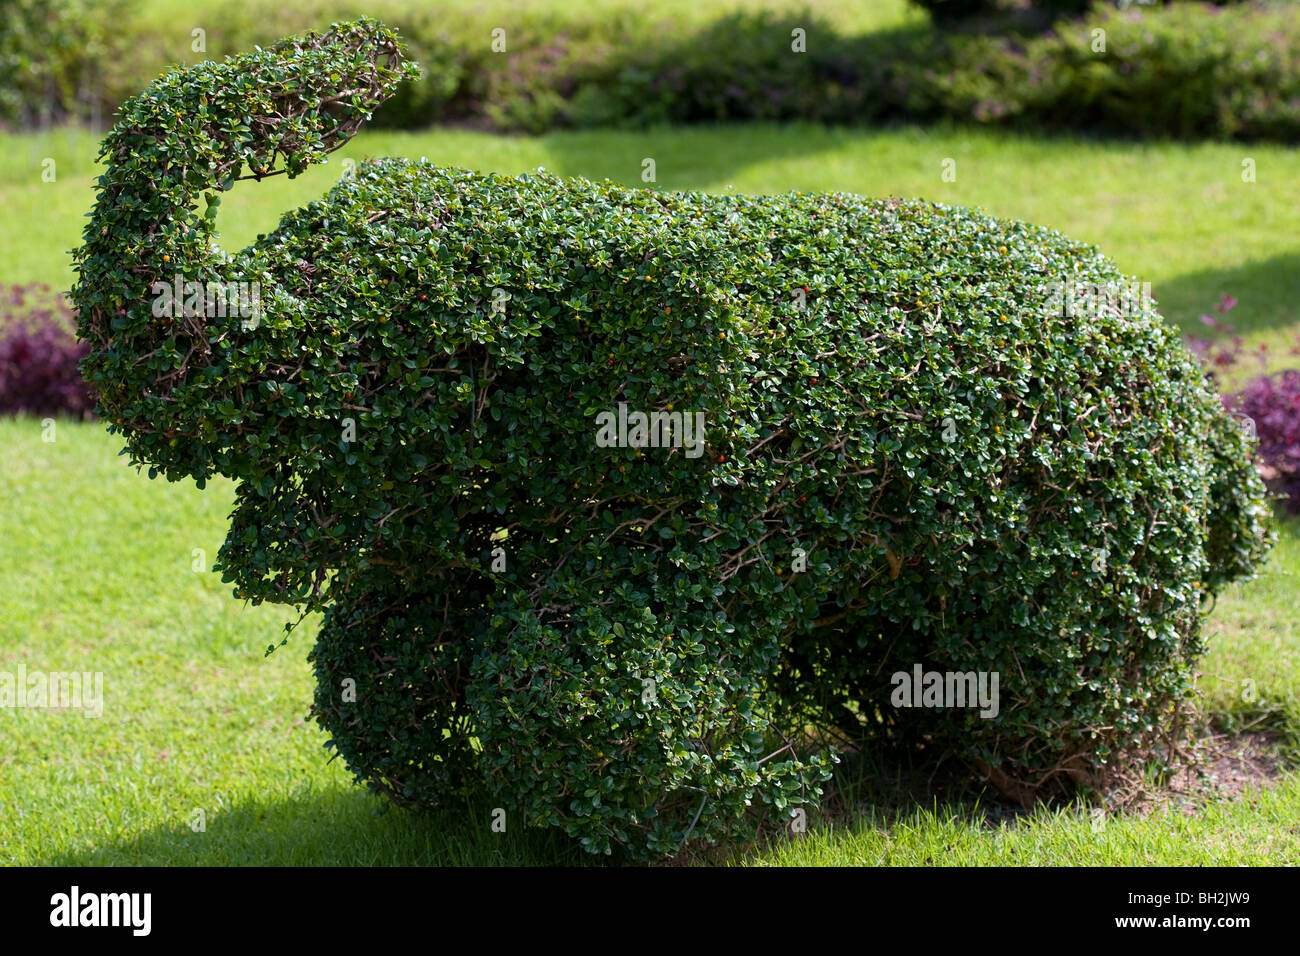 Topairy animals at the Nong Nooch Tropical Botanical Garden in Pattaya, Thailand Stock Photo